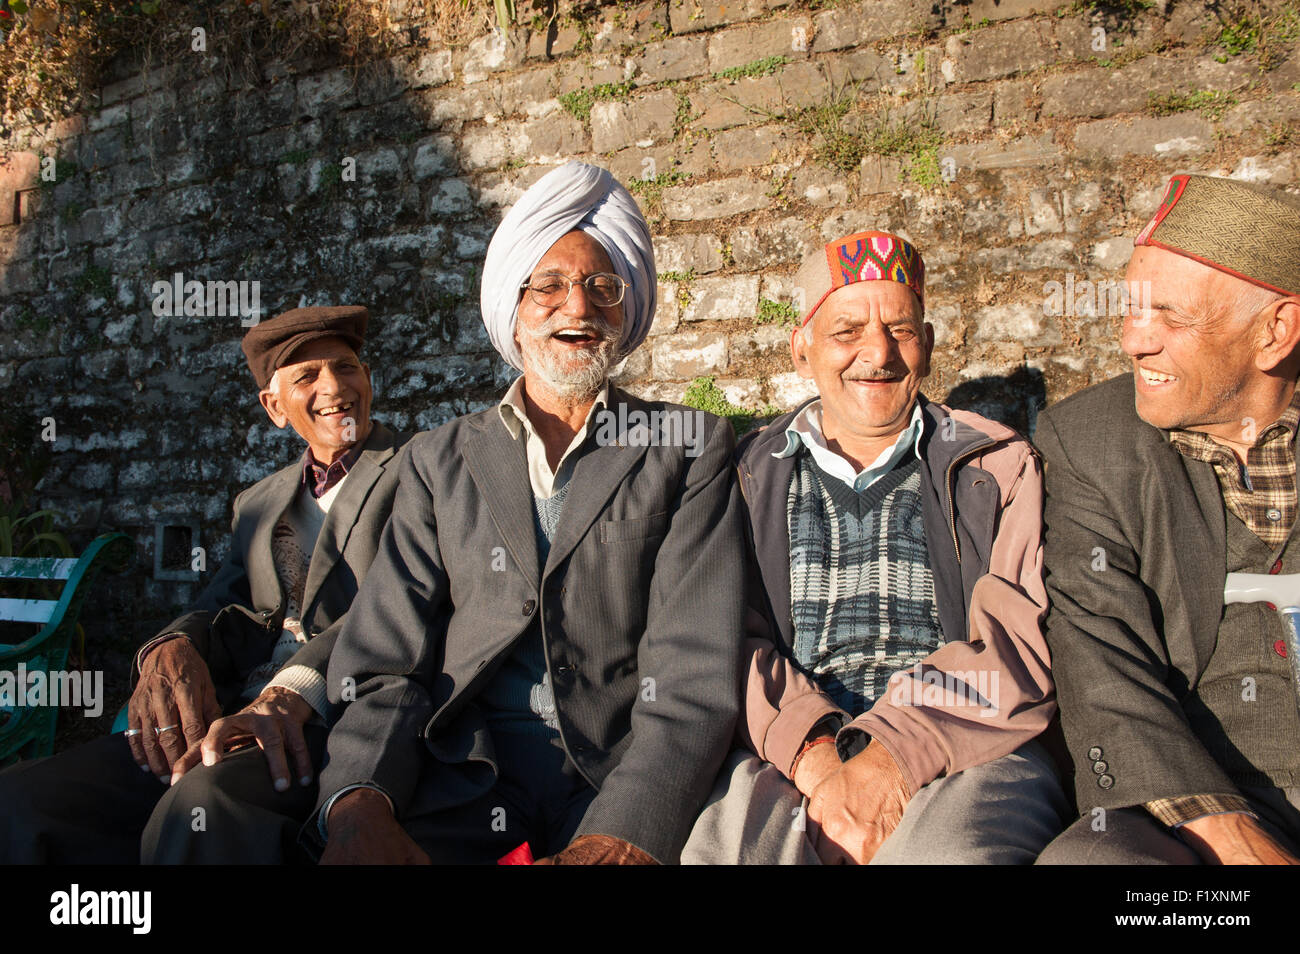 Shimla, Himachal Pradesh, India. Group of pensioners sitting on a bench, laughing. Stock Photo